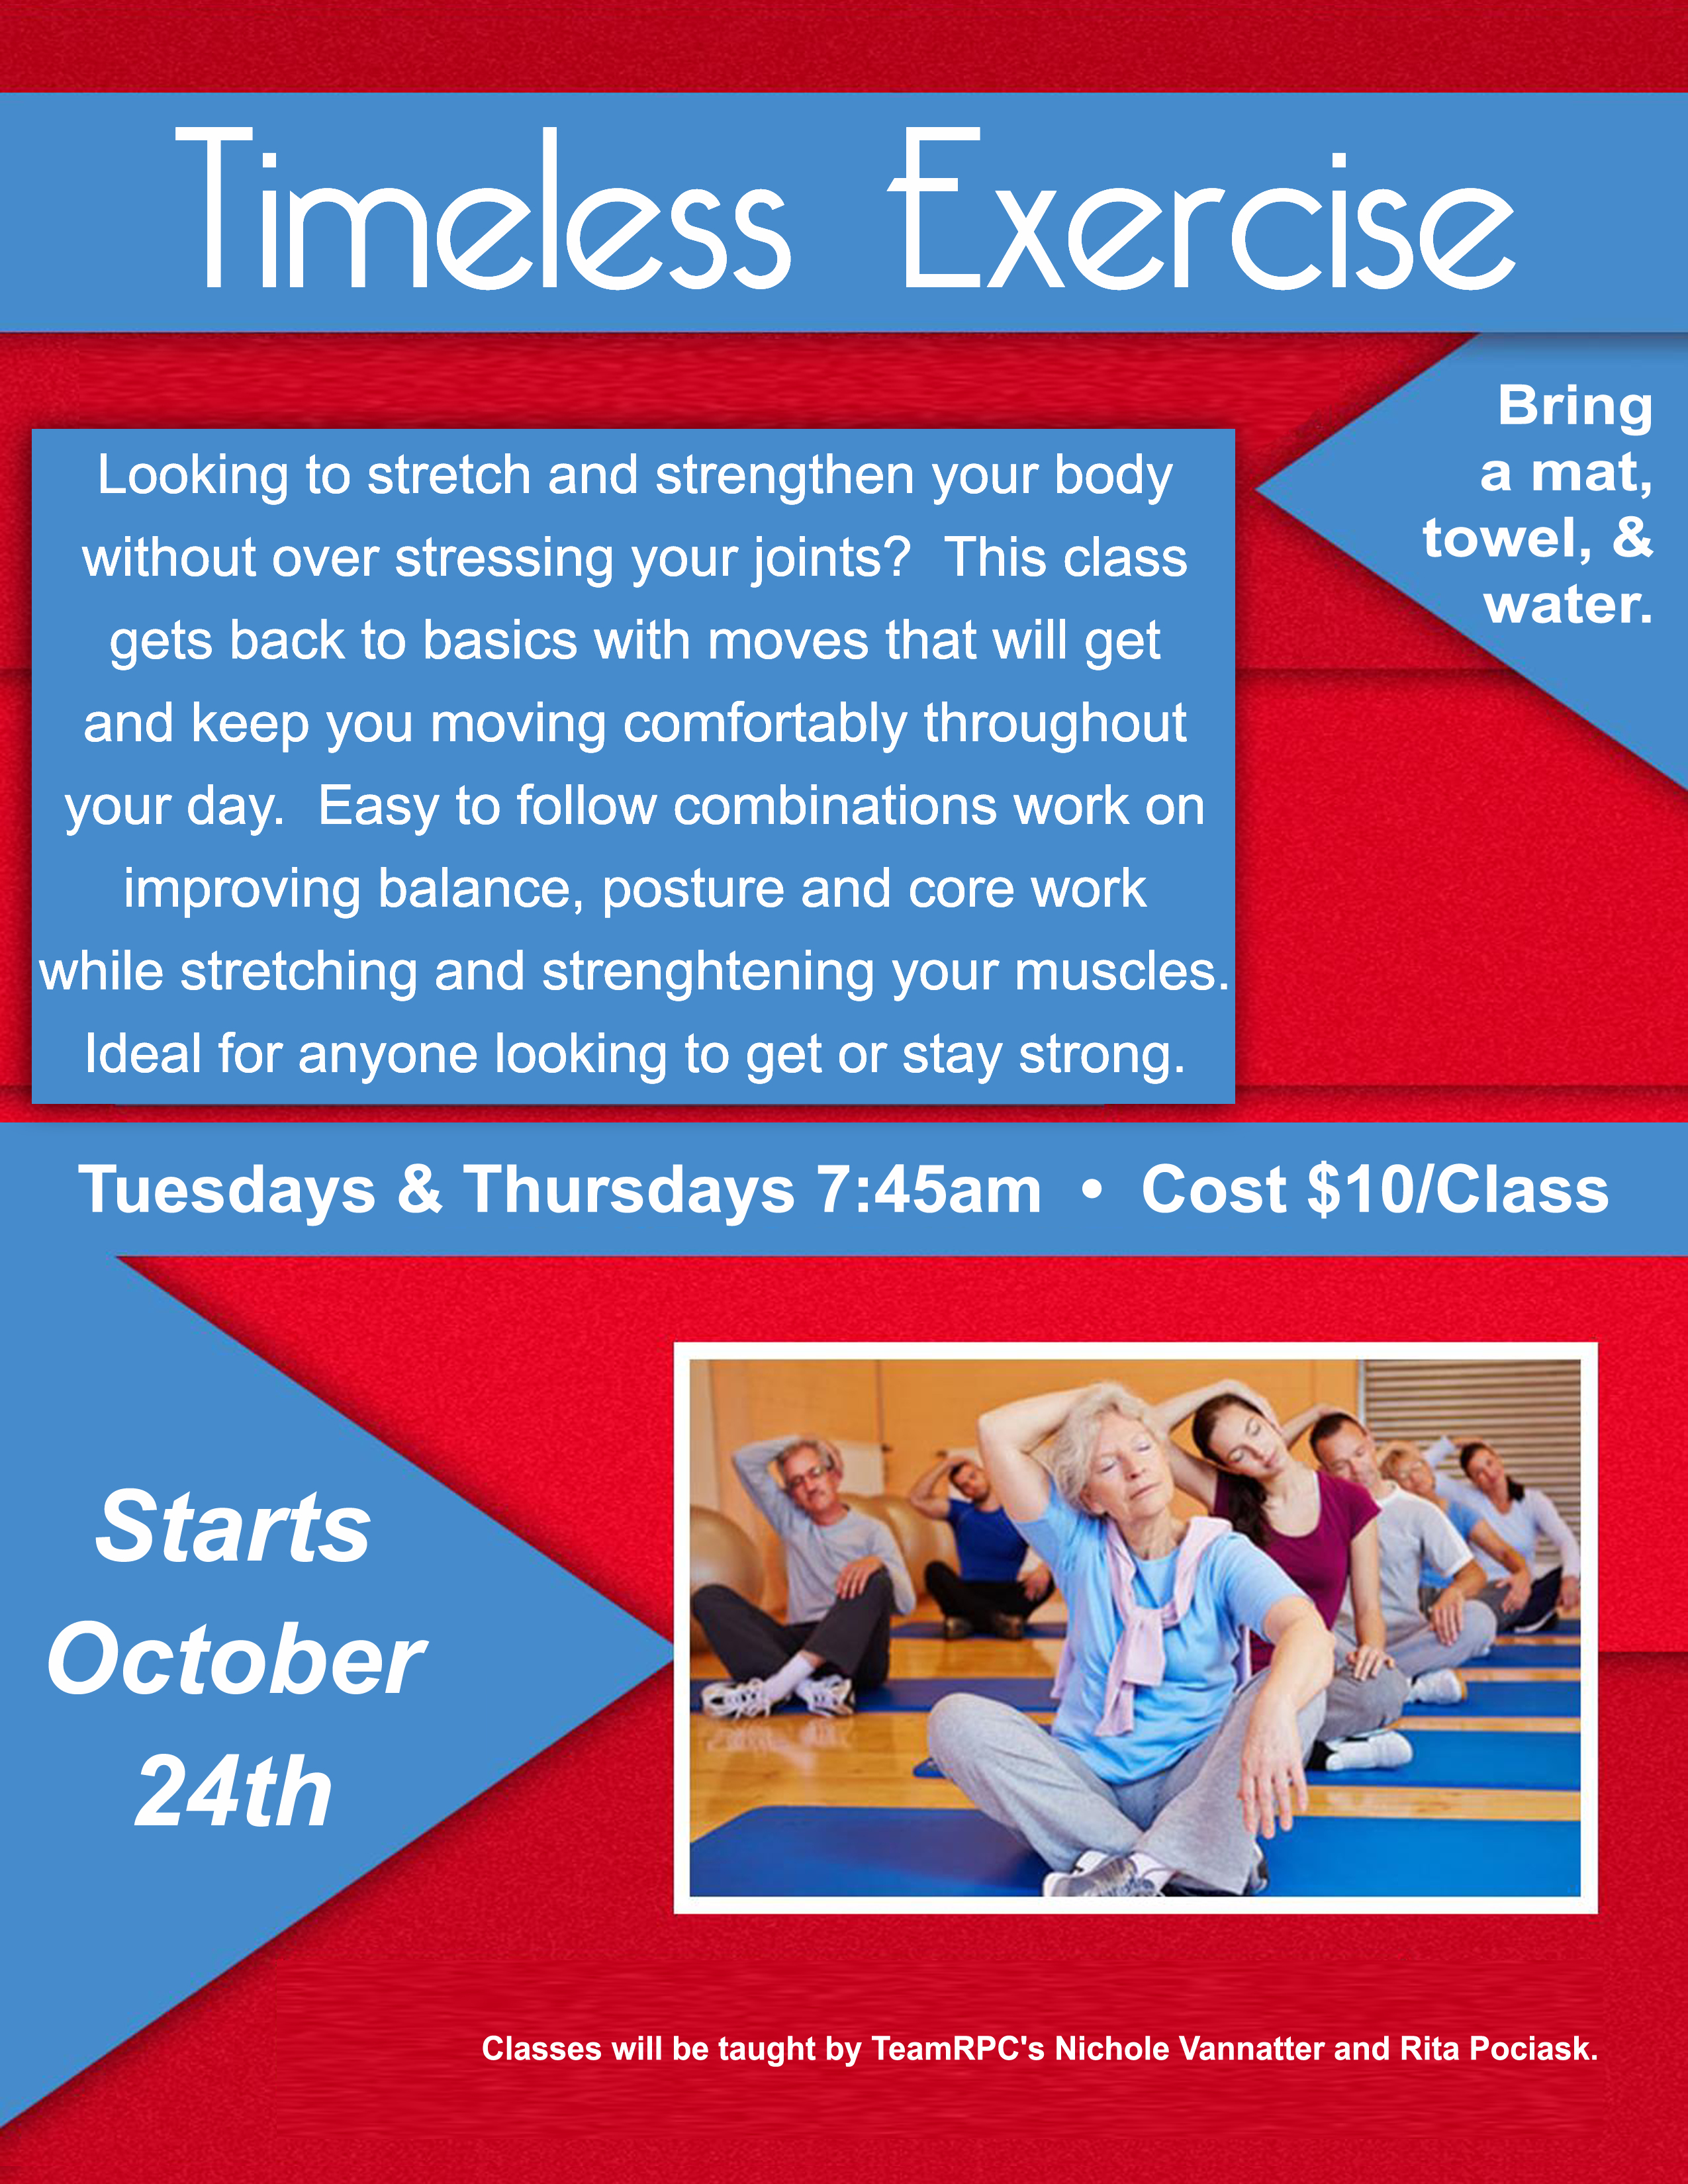 Timeless Exercise at Pelican Landing